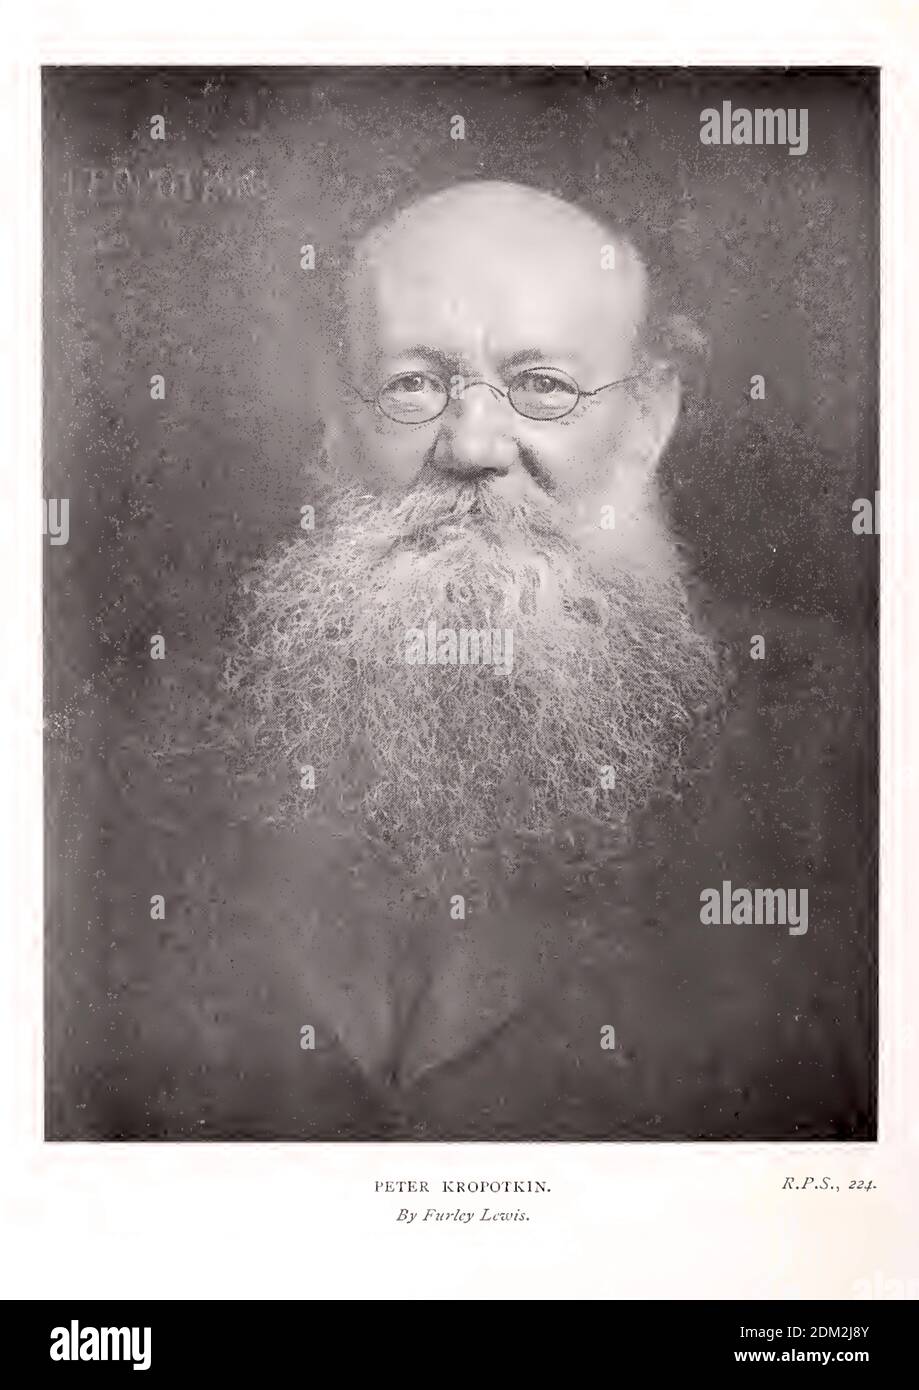 Vintage photograph of the Russian zoologist, evolutionary theorist, geographer, anarchist and communist. taken by Furley Lewis in 1904. Stock Photo